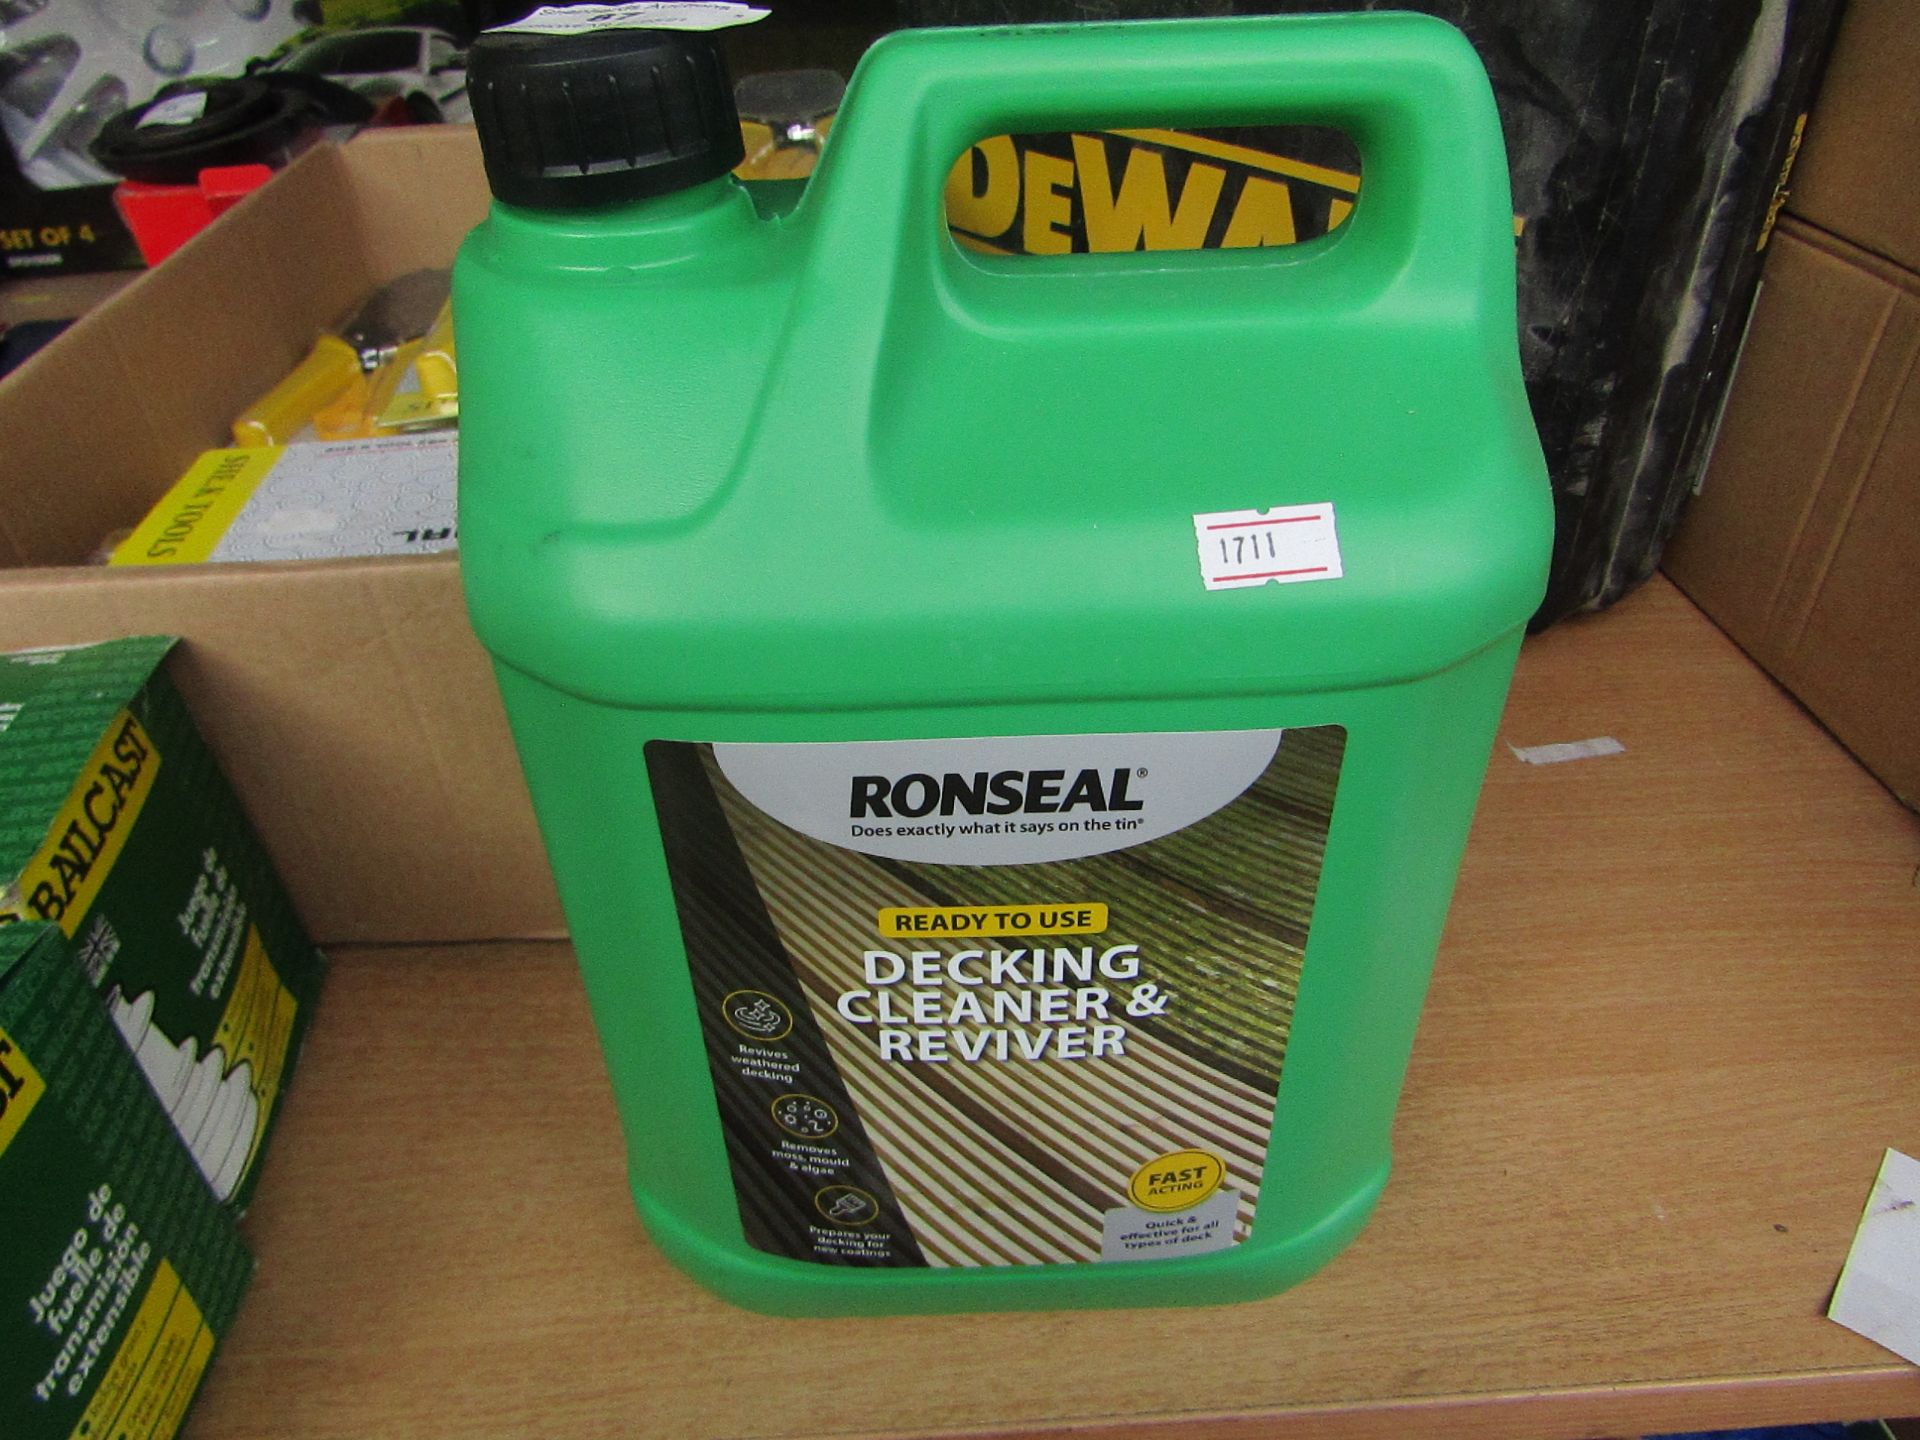 Ronseal - Ready To Use Decking Cleaner & Reviver 5 Litres - Unused.